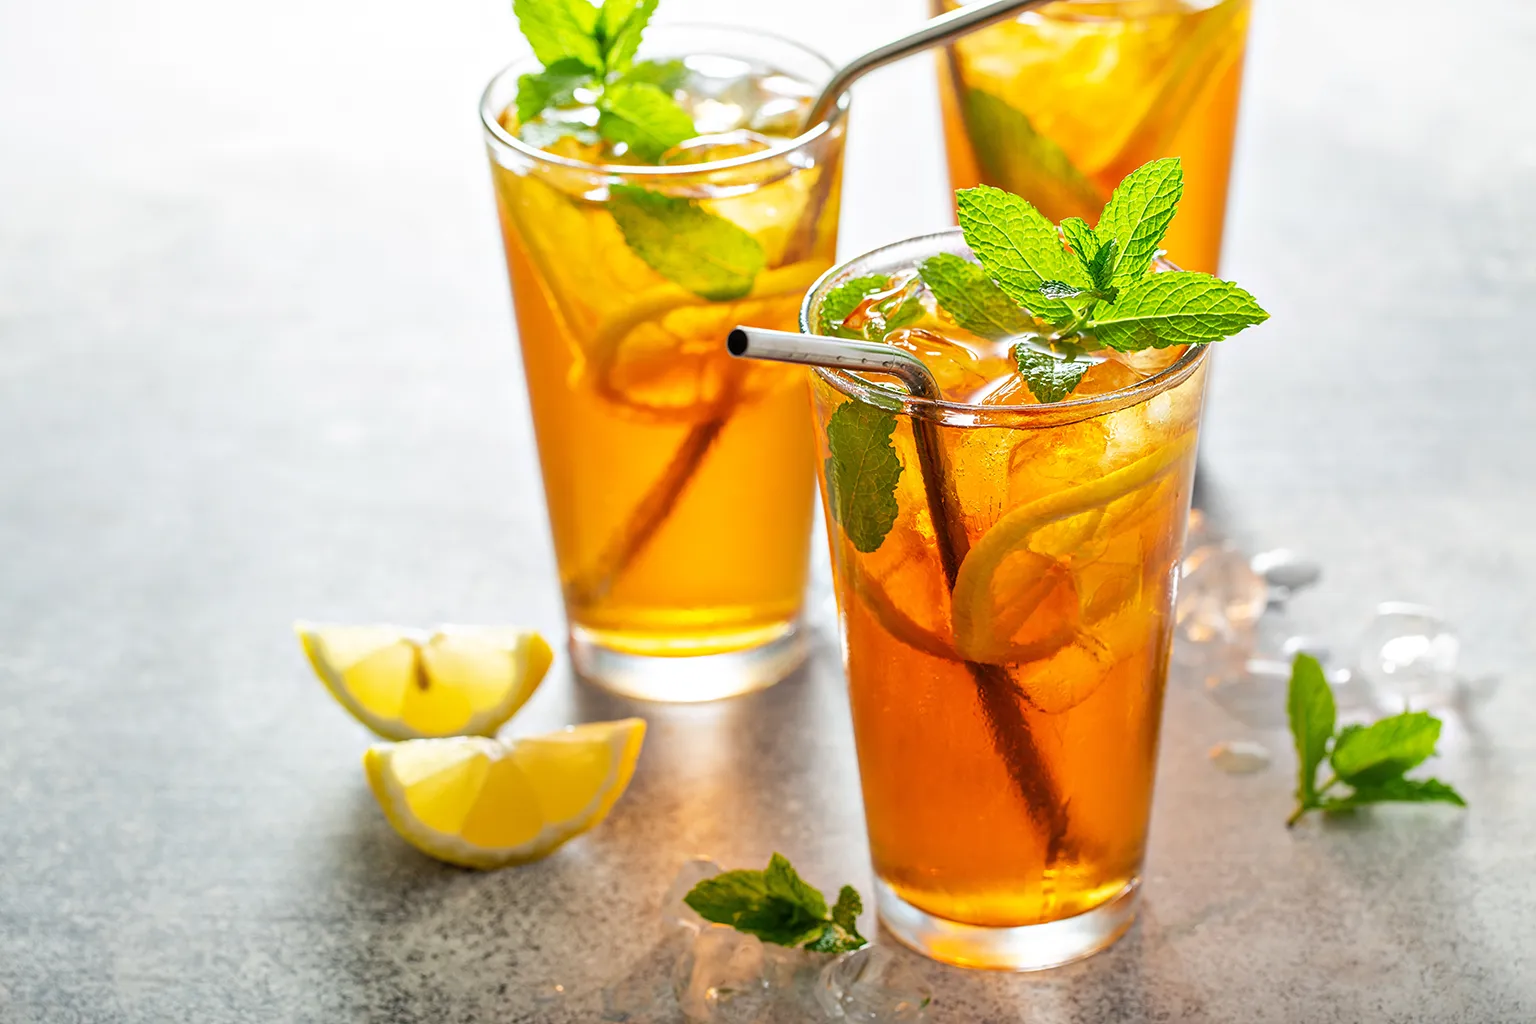 Refreshing classic iced tea with lemon and mint